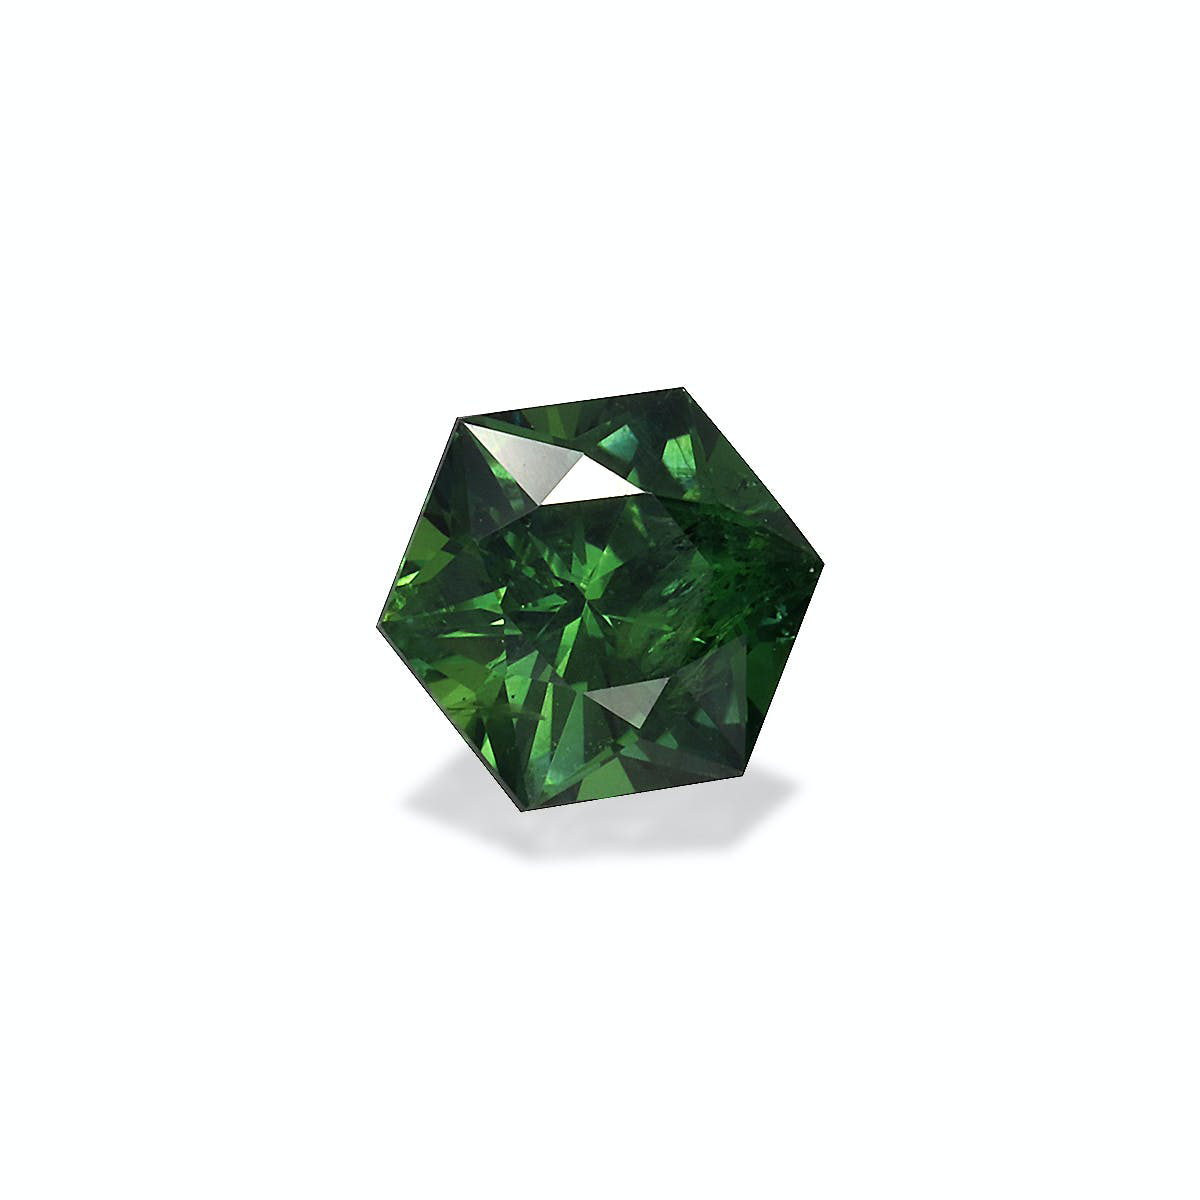 Picture of Green Teal Sapphire 1.15ct - 6mm (TL0043)